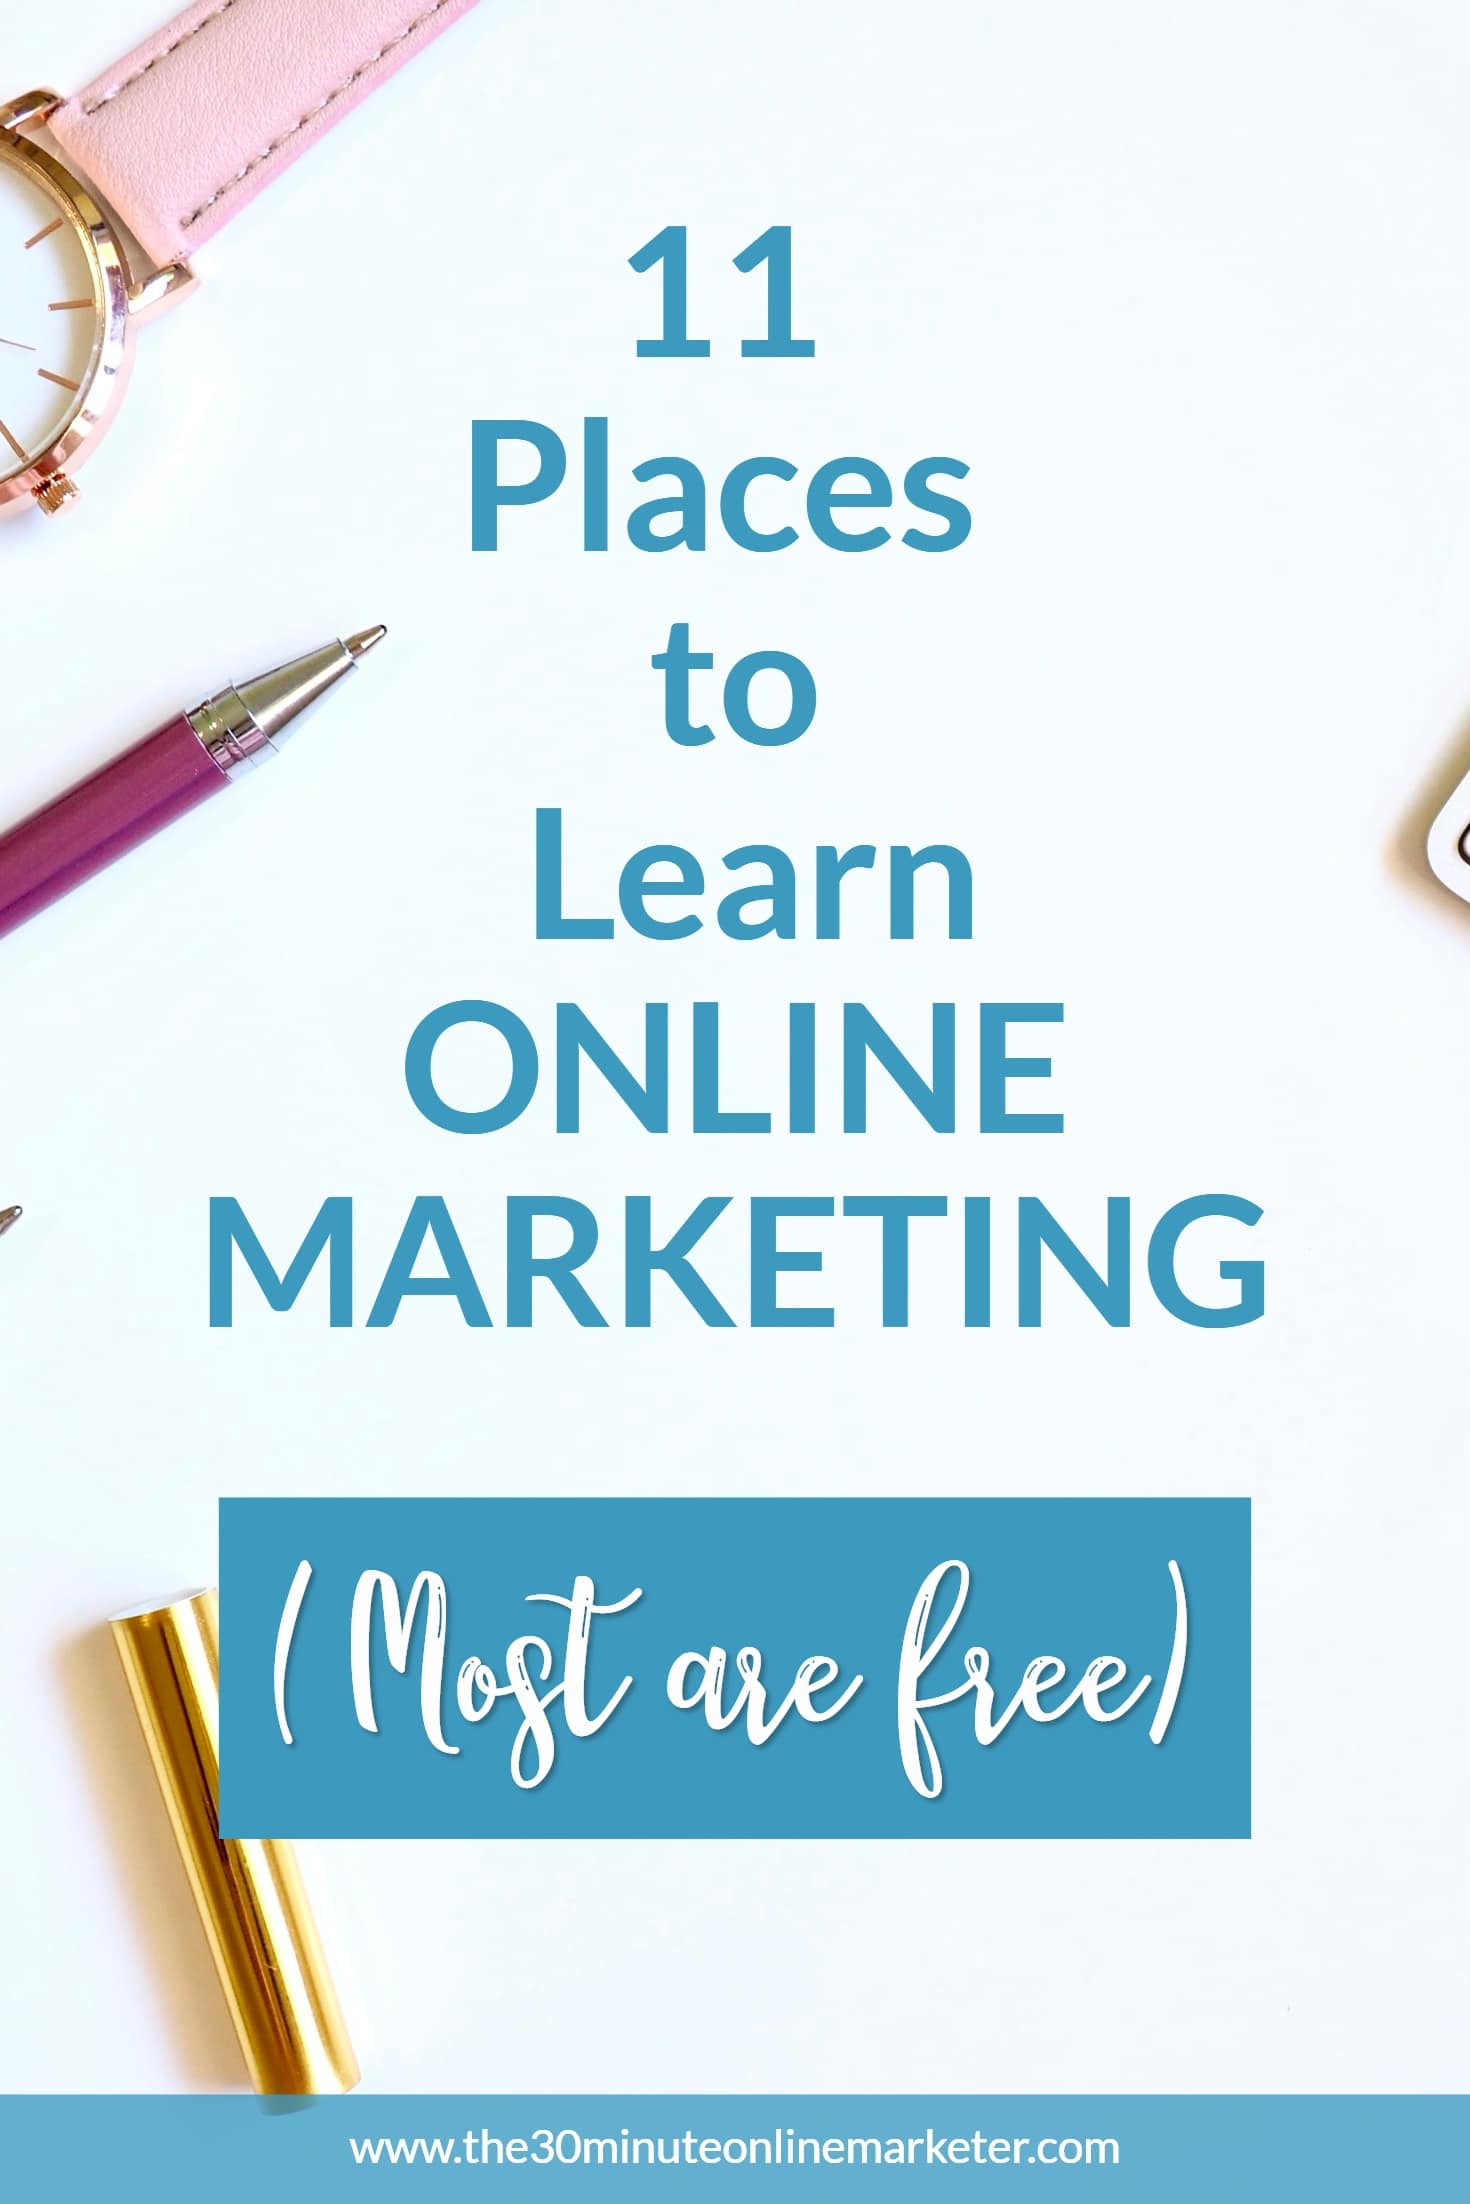 If you need help to promote your business and don't know where to find the best resources, check out this list of (mostly free) places where you can learn everything you know to promote your business online. #onlinemarketing #promoteyourbusiness